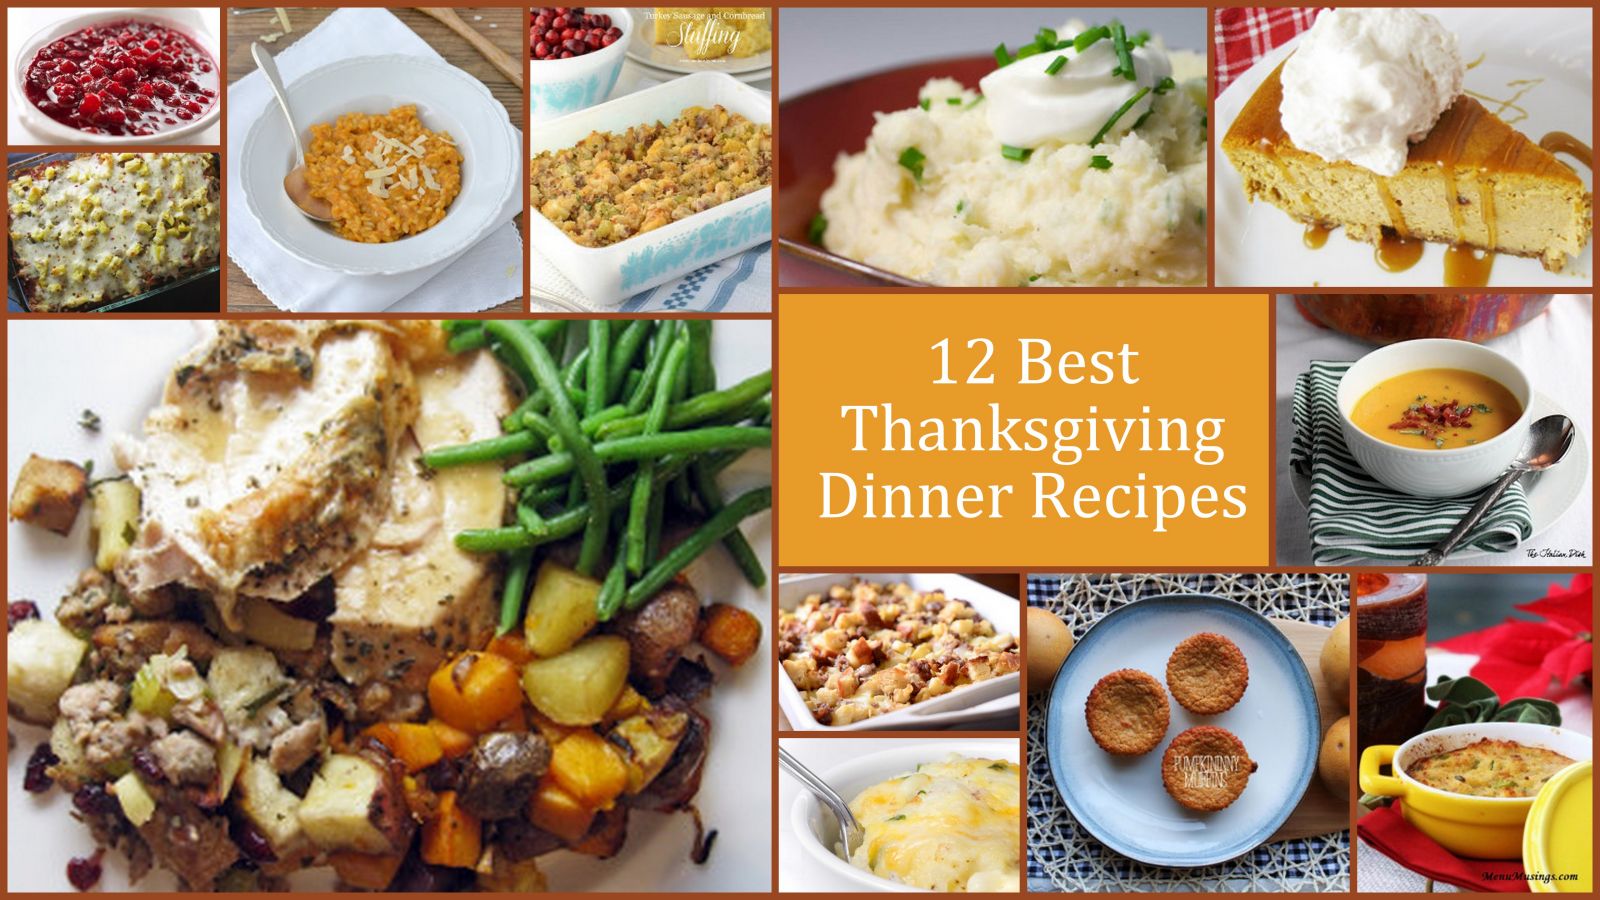 30 Ideas for Best Thanksgiving Dinner - Most Popular Ideas of All Time